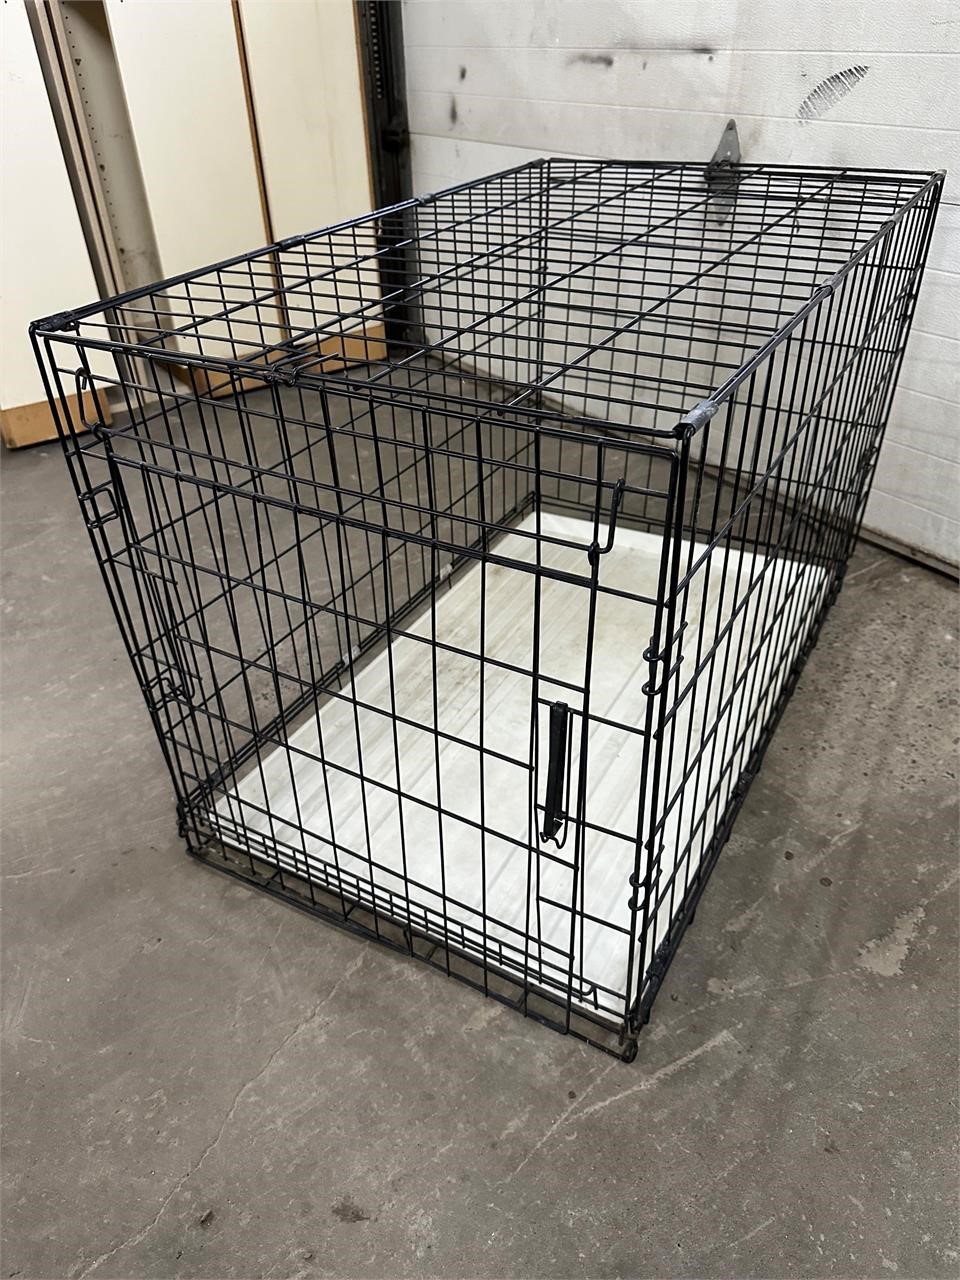 Large Kennel 41"x25"x28" Tall